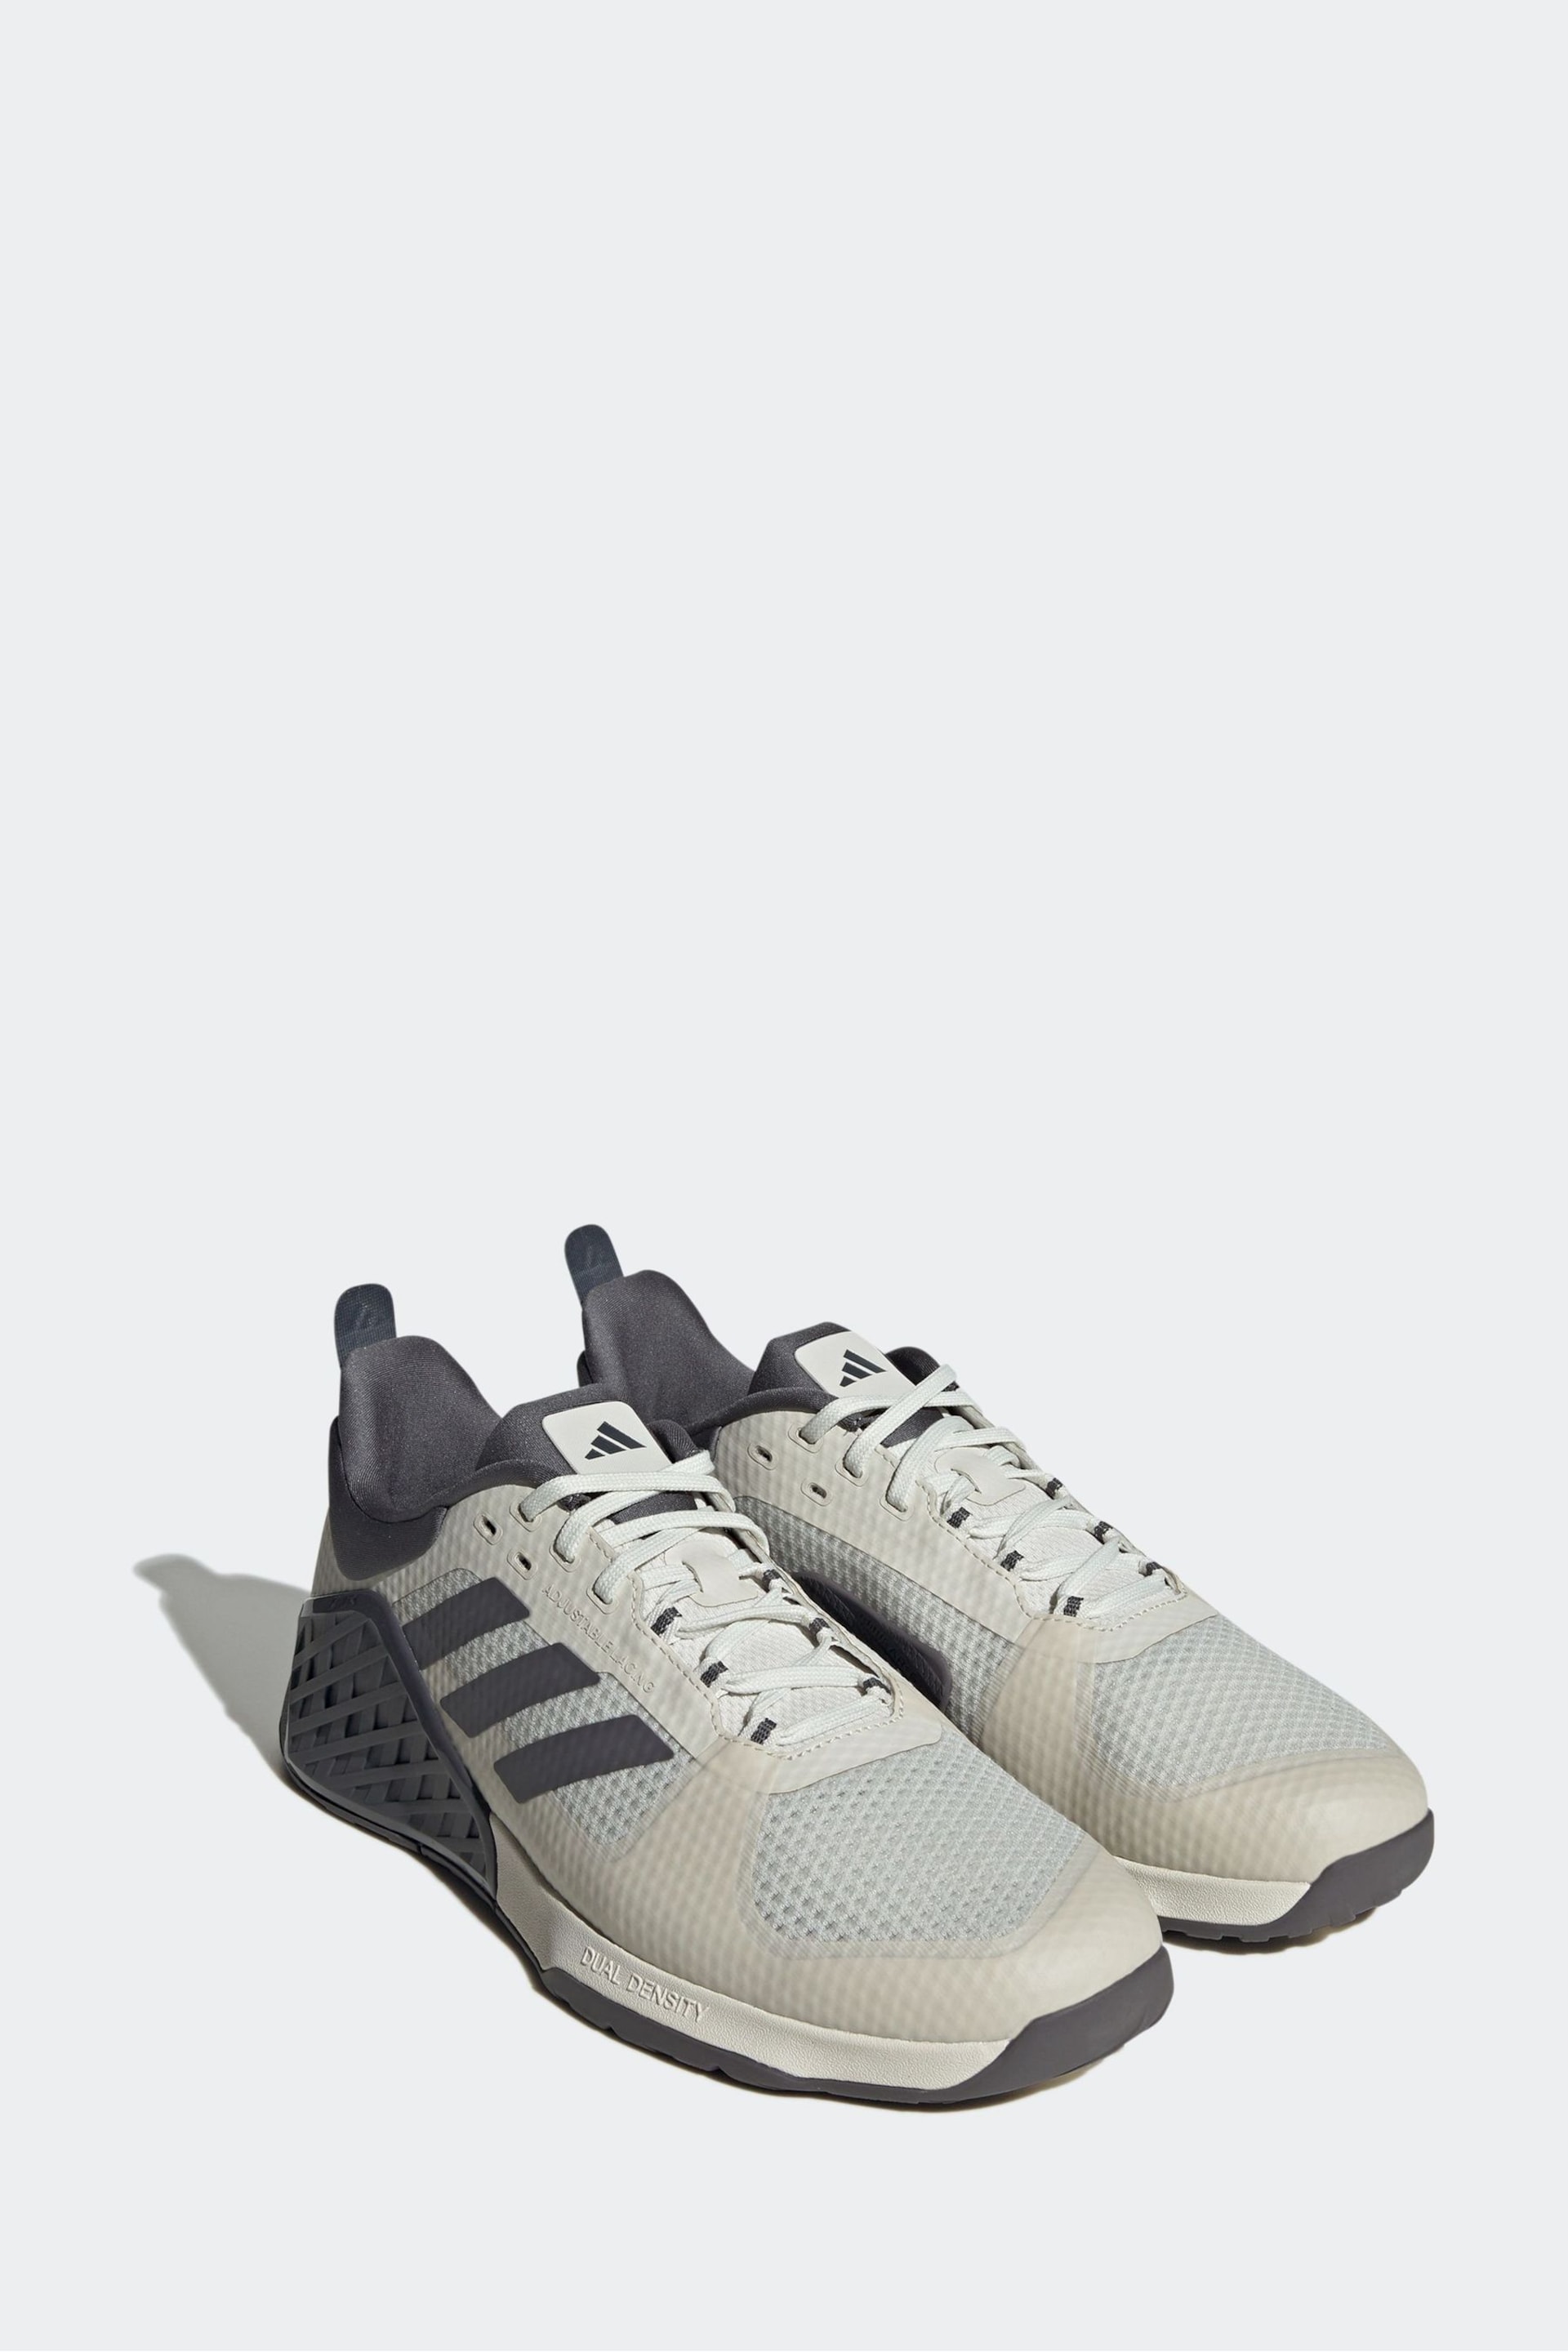 adidas Grey Dropset 2 Trainers - Image 4 of 10